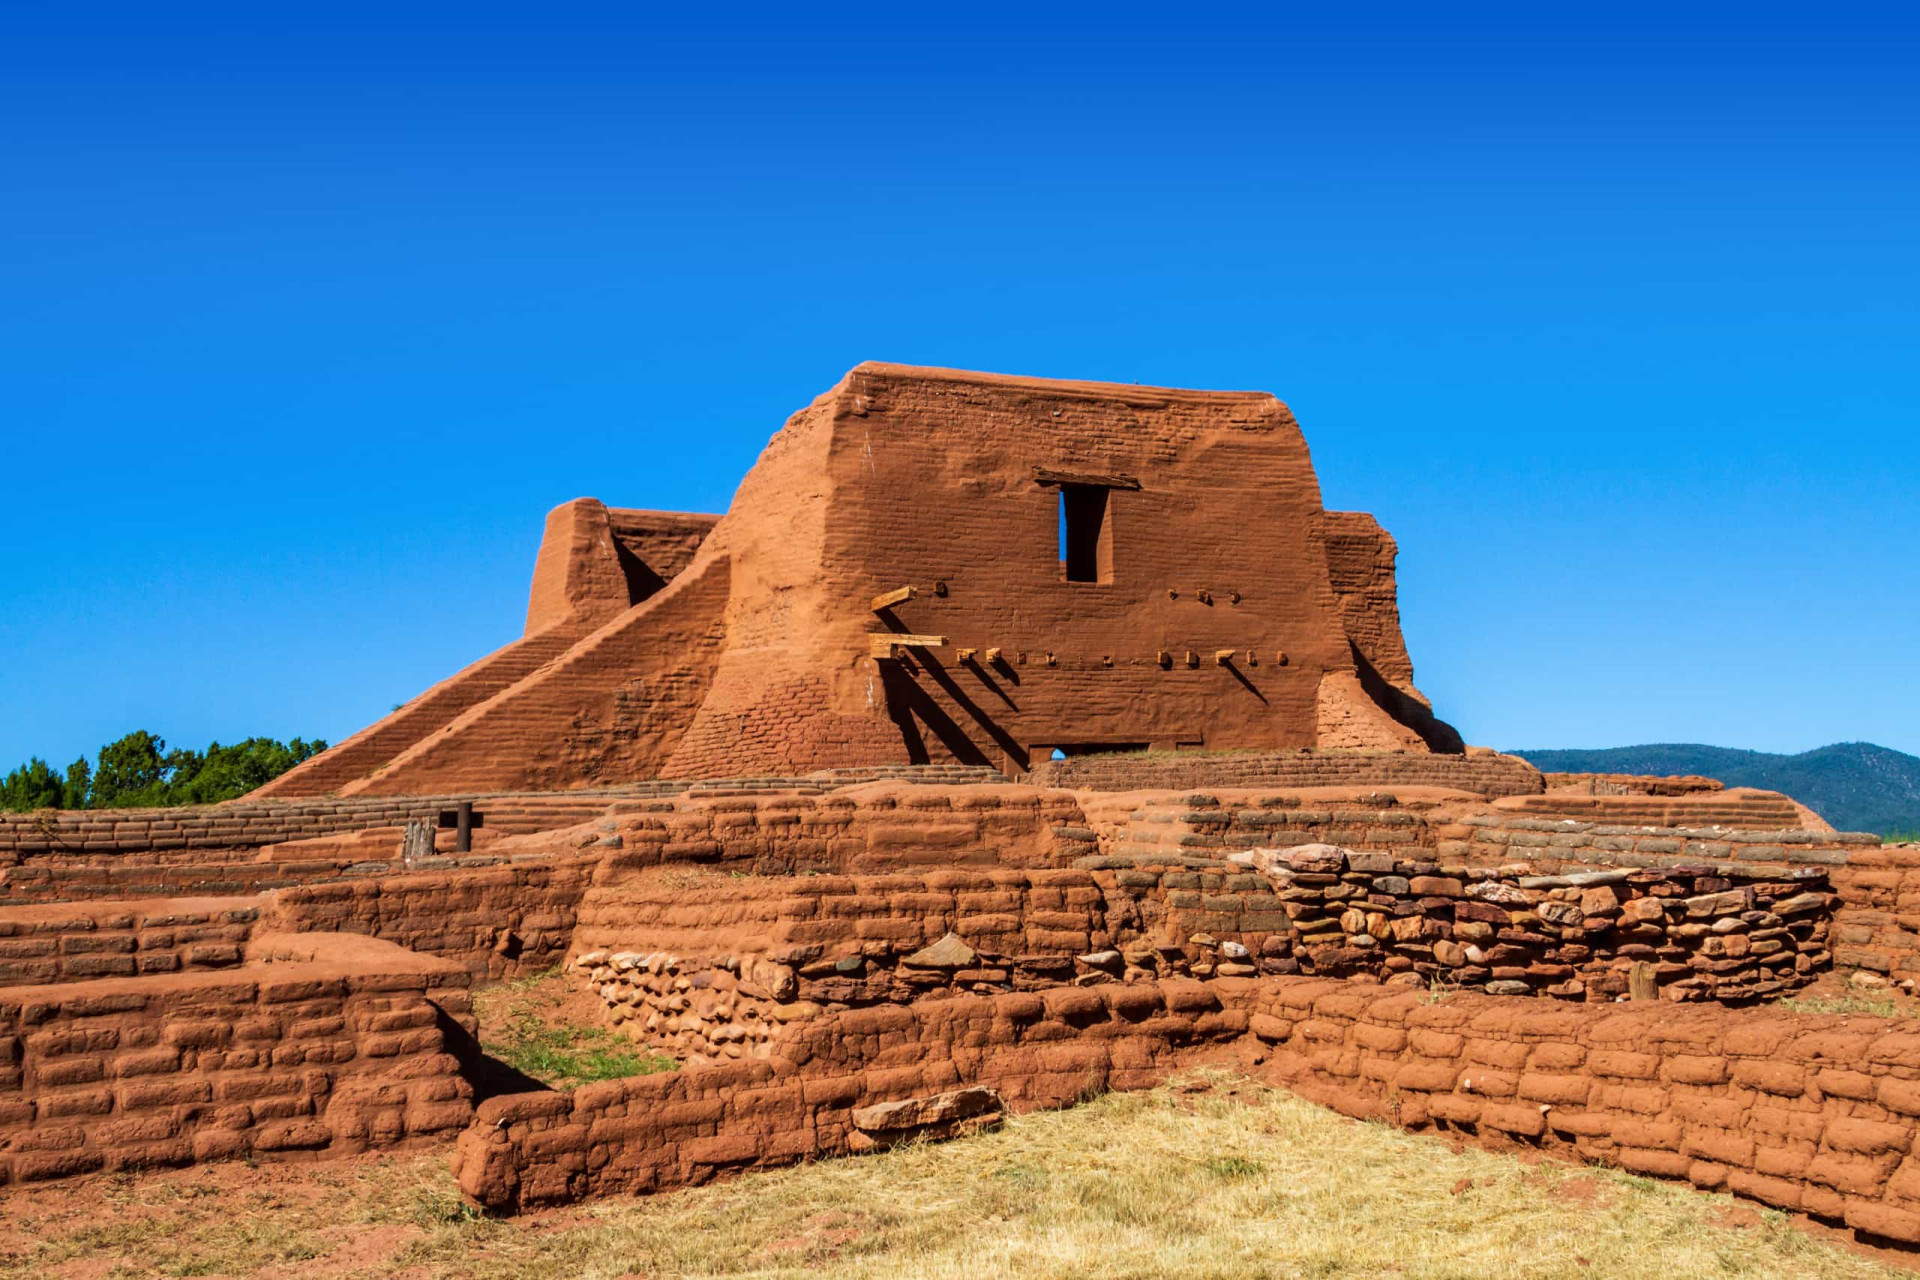 <p>New Mexico's archaeological treasures include the Pecos National Historical Park. This is the site of what was once one of the largest Native American pueblos in the state, inhabited from the early 14th century until 1838. The impressive ruins of the mission church (pictured) serve as a focal point. The park also encompasses the Glorieta Pass Battlefield, scene of an 1862 American Civil War battle that ended Confederate ambitions to cut off the West from the Union.</p>